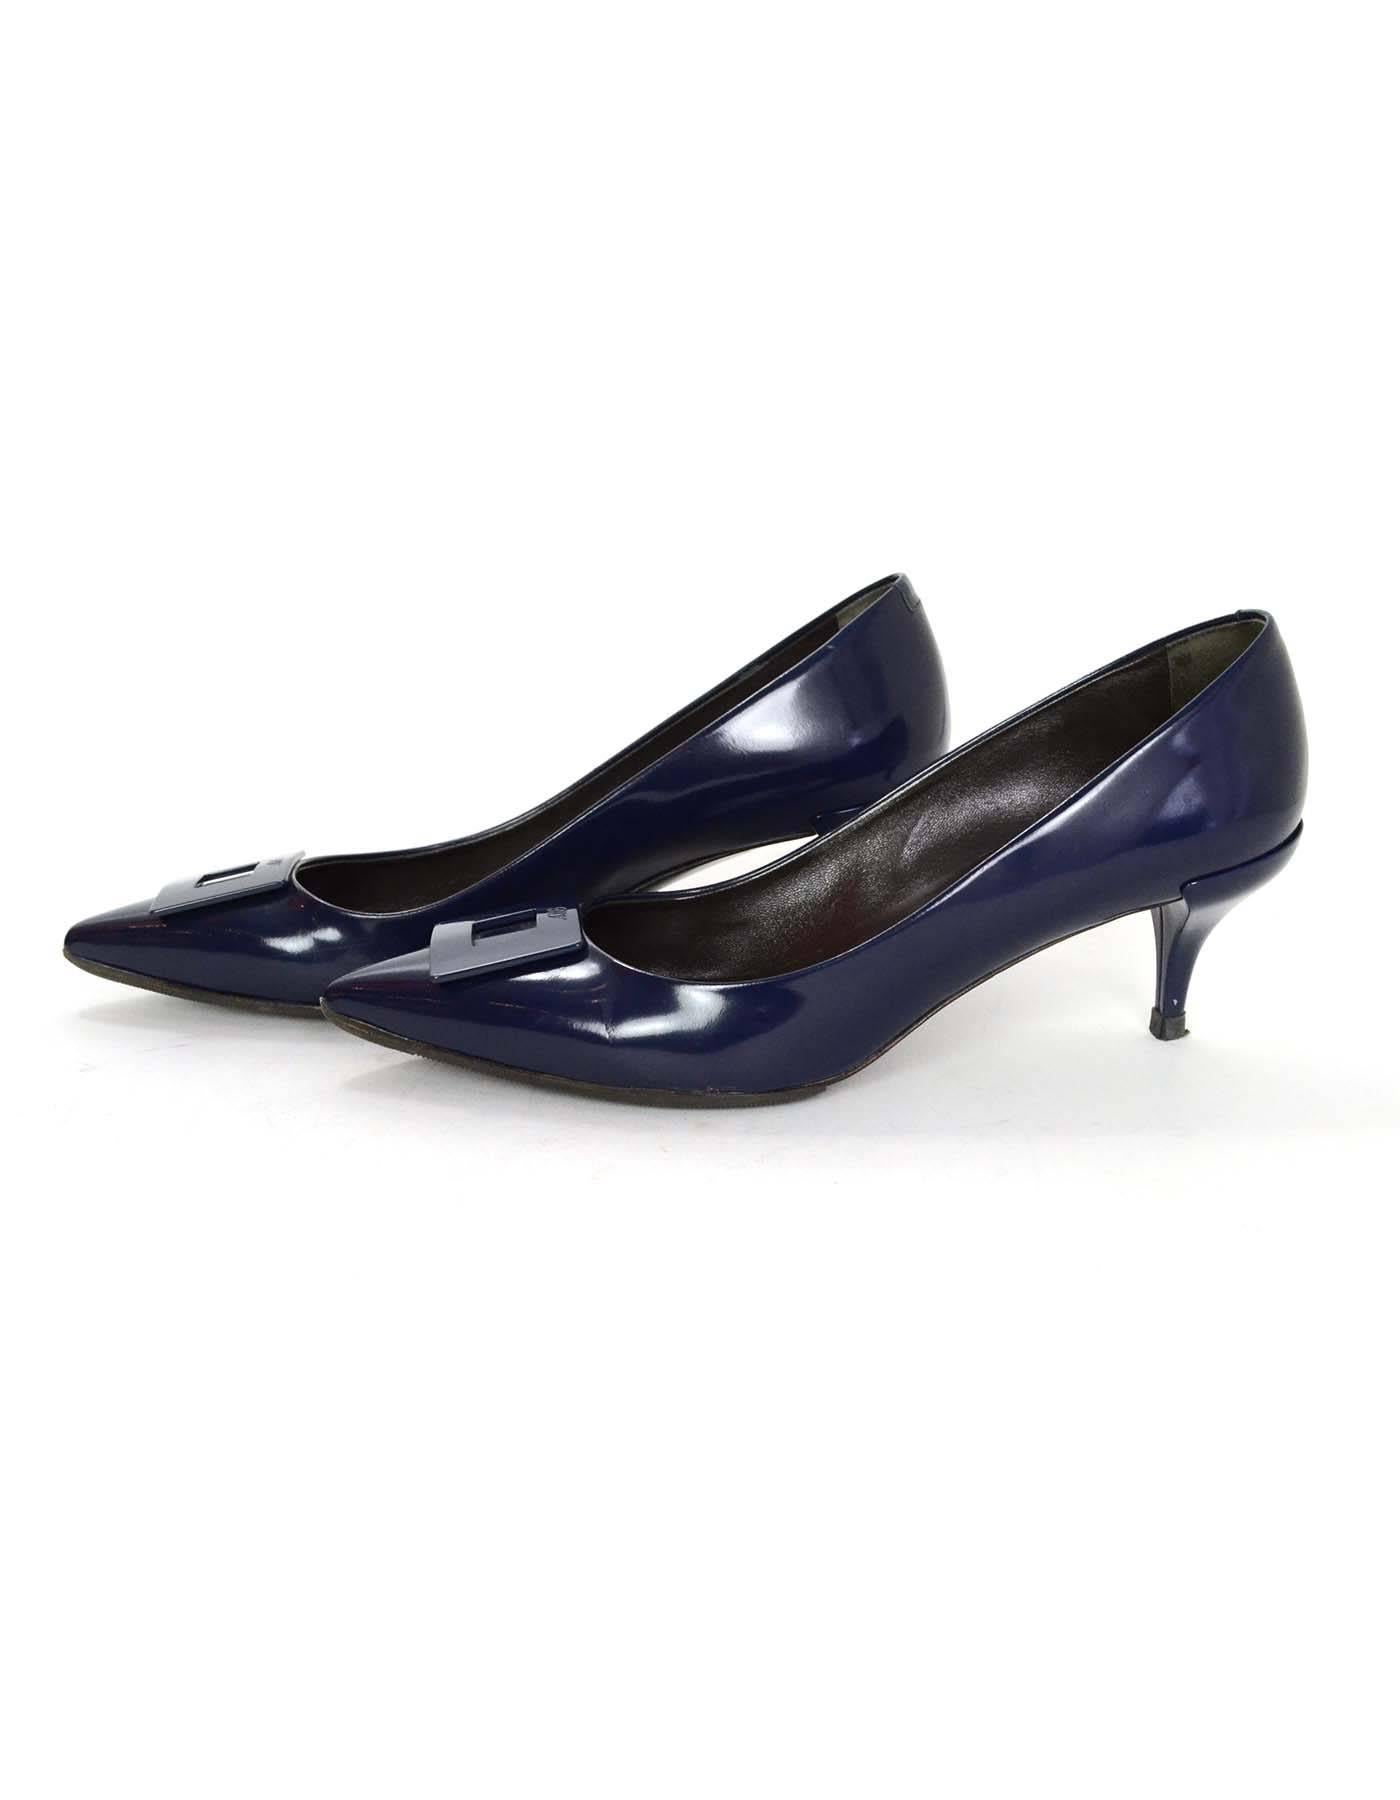 Roger Vivier Navy Glazed Leather Pumps Sz 36.5
Features pointed toes with signature buckle detail

Made In: Italy
Color: Navy
Materials: Glazed leather
Closure/Opening: Slide on
Sole Stamp: RV Made in Italy Women's size 36.5
Overall